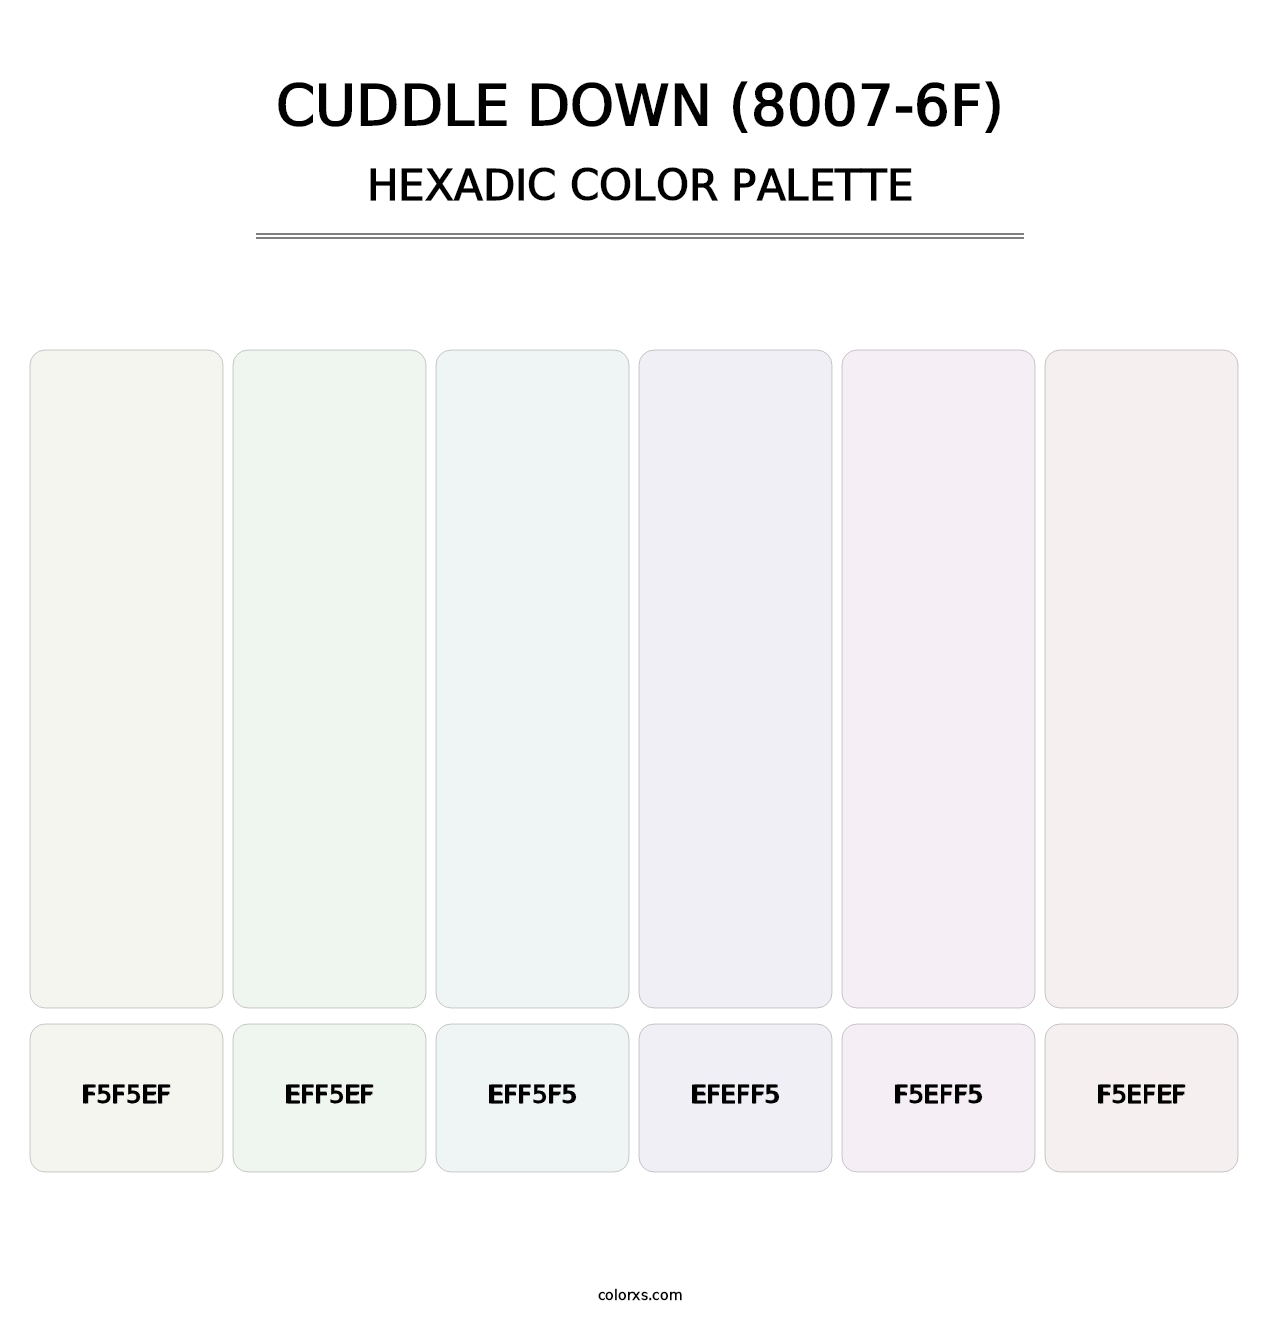 Cuddle Down (8007-6F) - Hexadic Color Palette